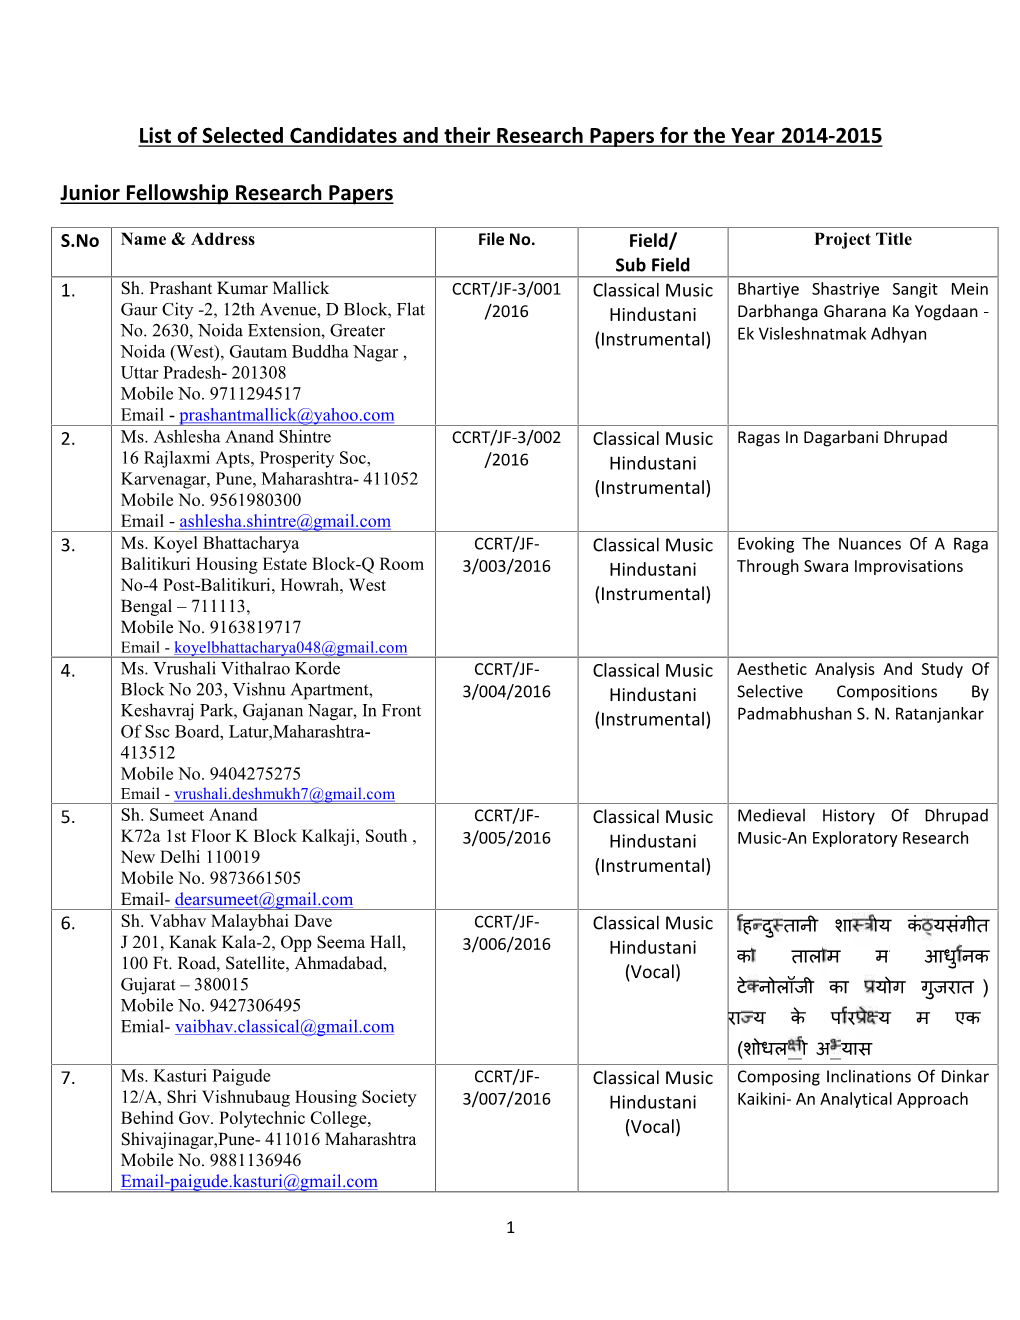 List of Selected Candidates and Their Research Papers for the Year 2014-2015